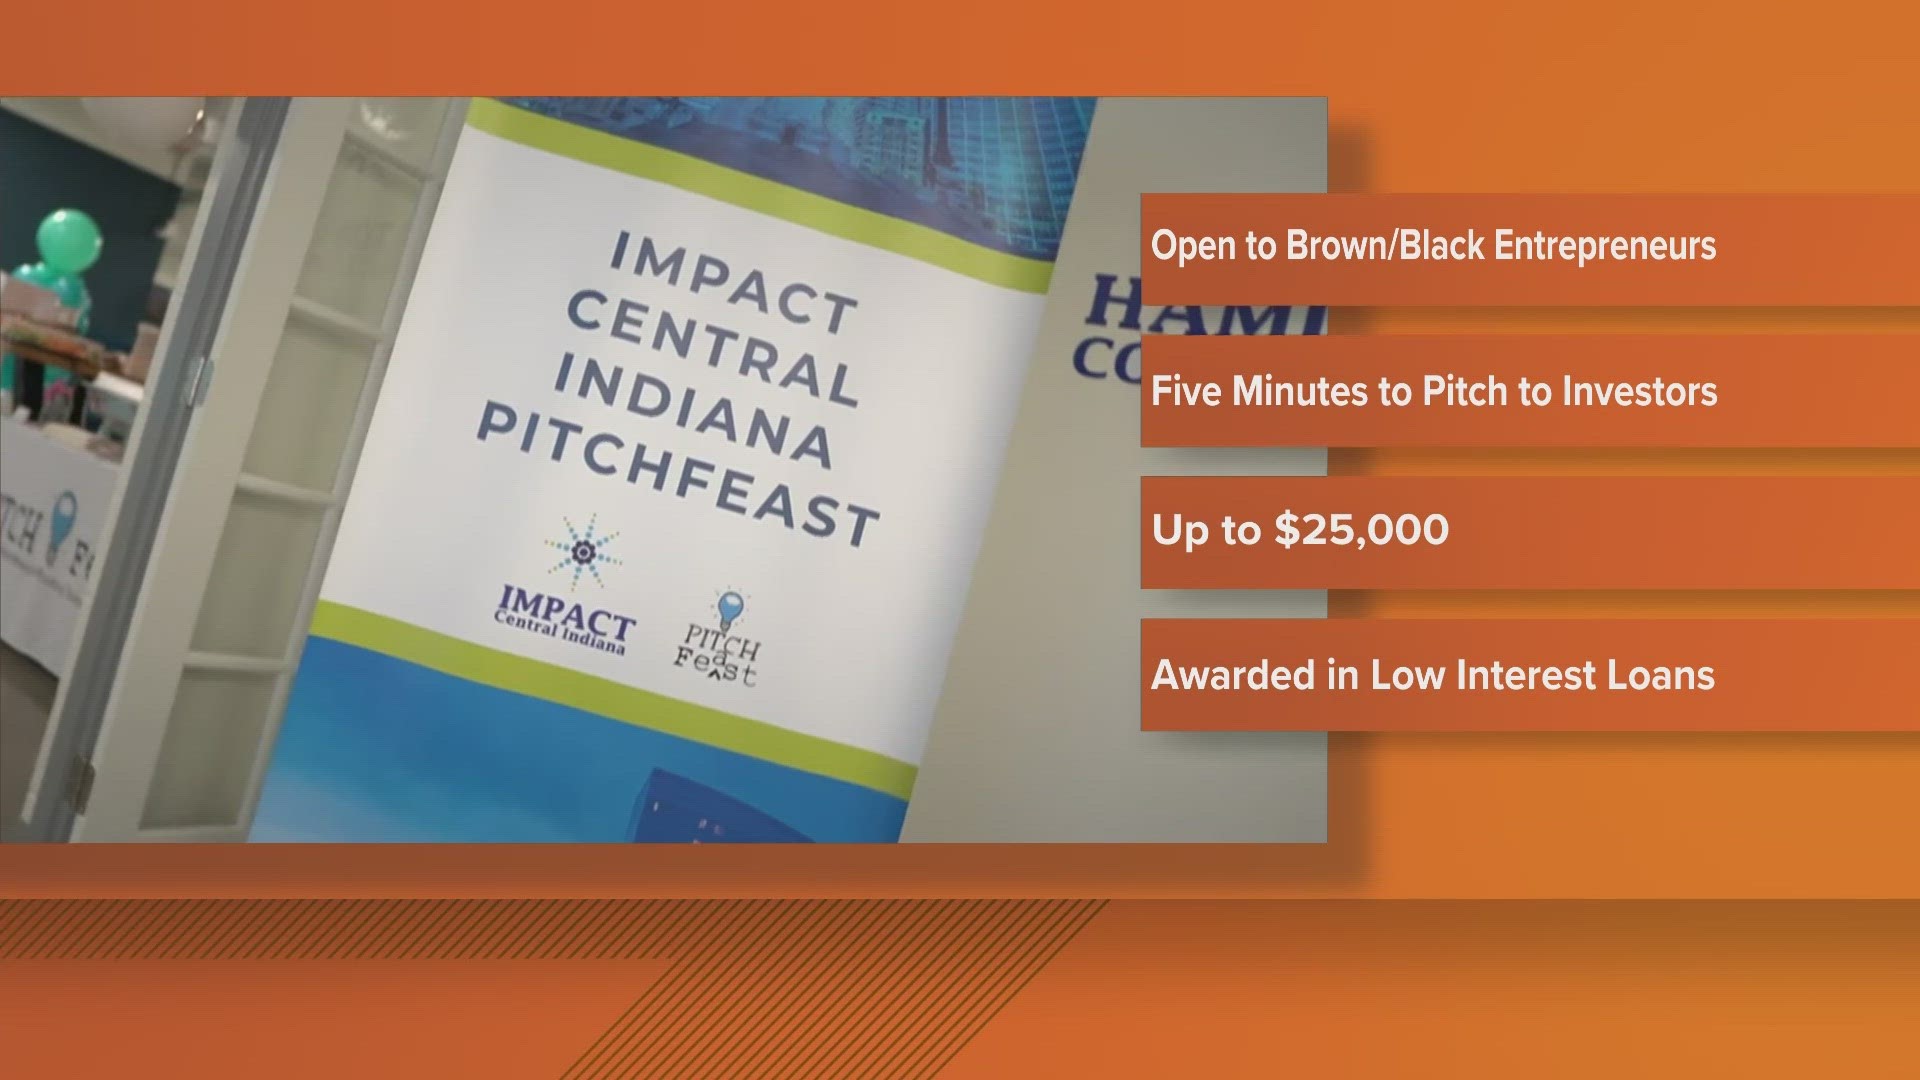 It's a competition that gives Indy entrepreneurs a chance to win cash for their startup.